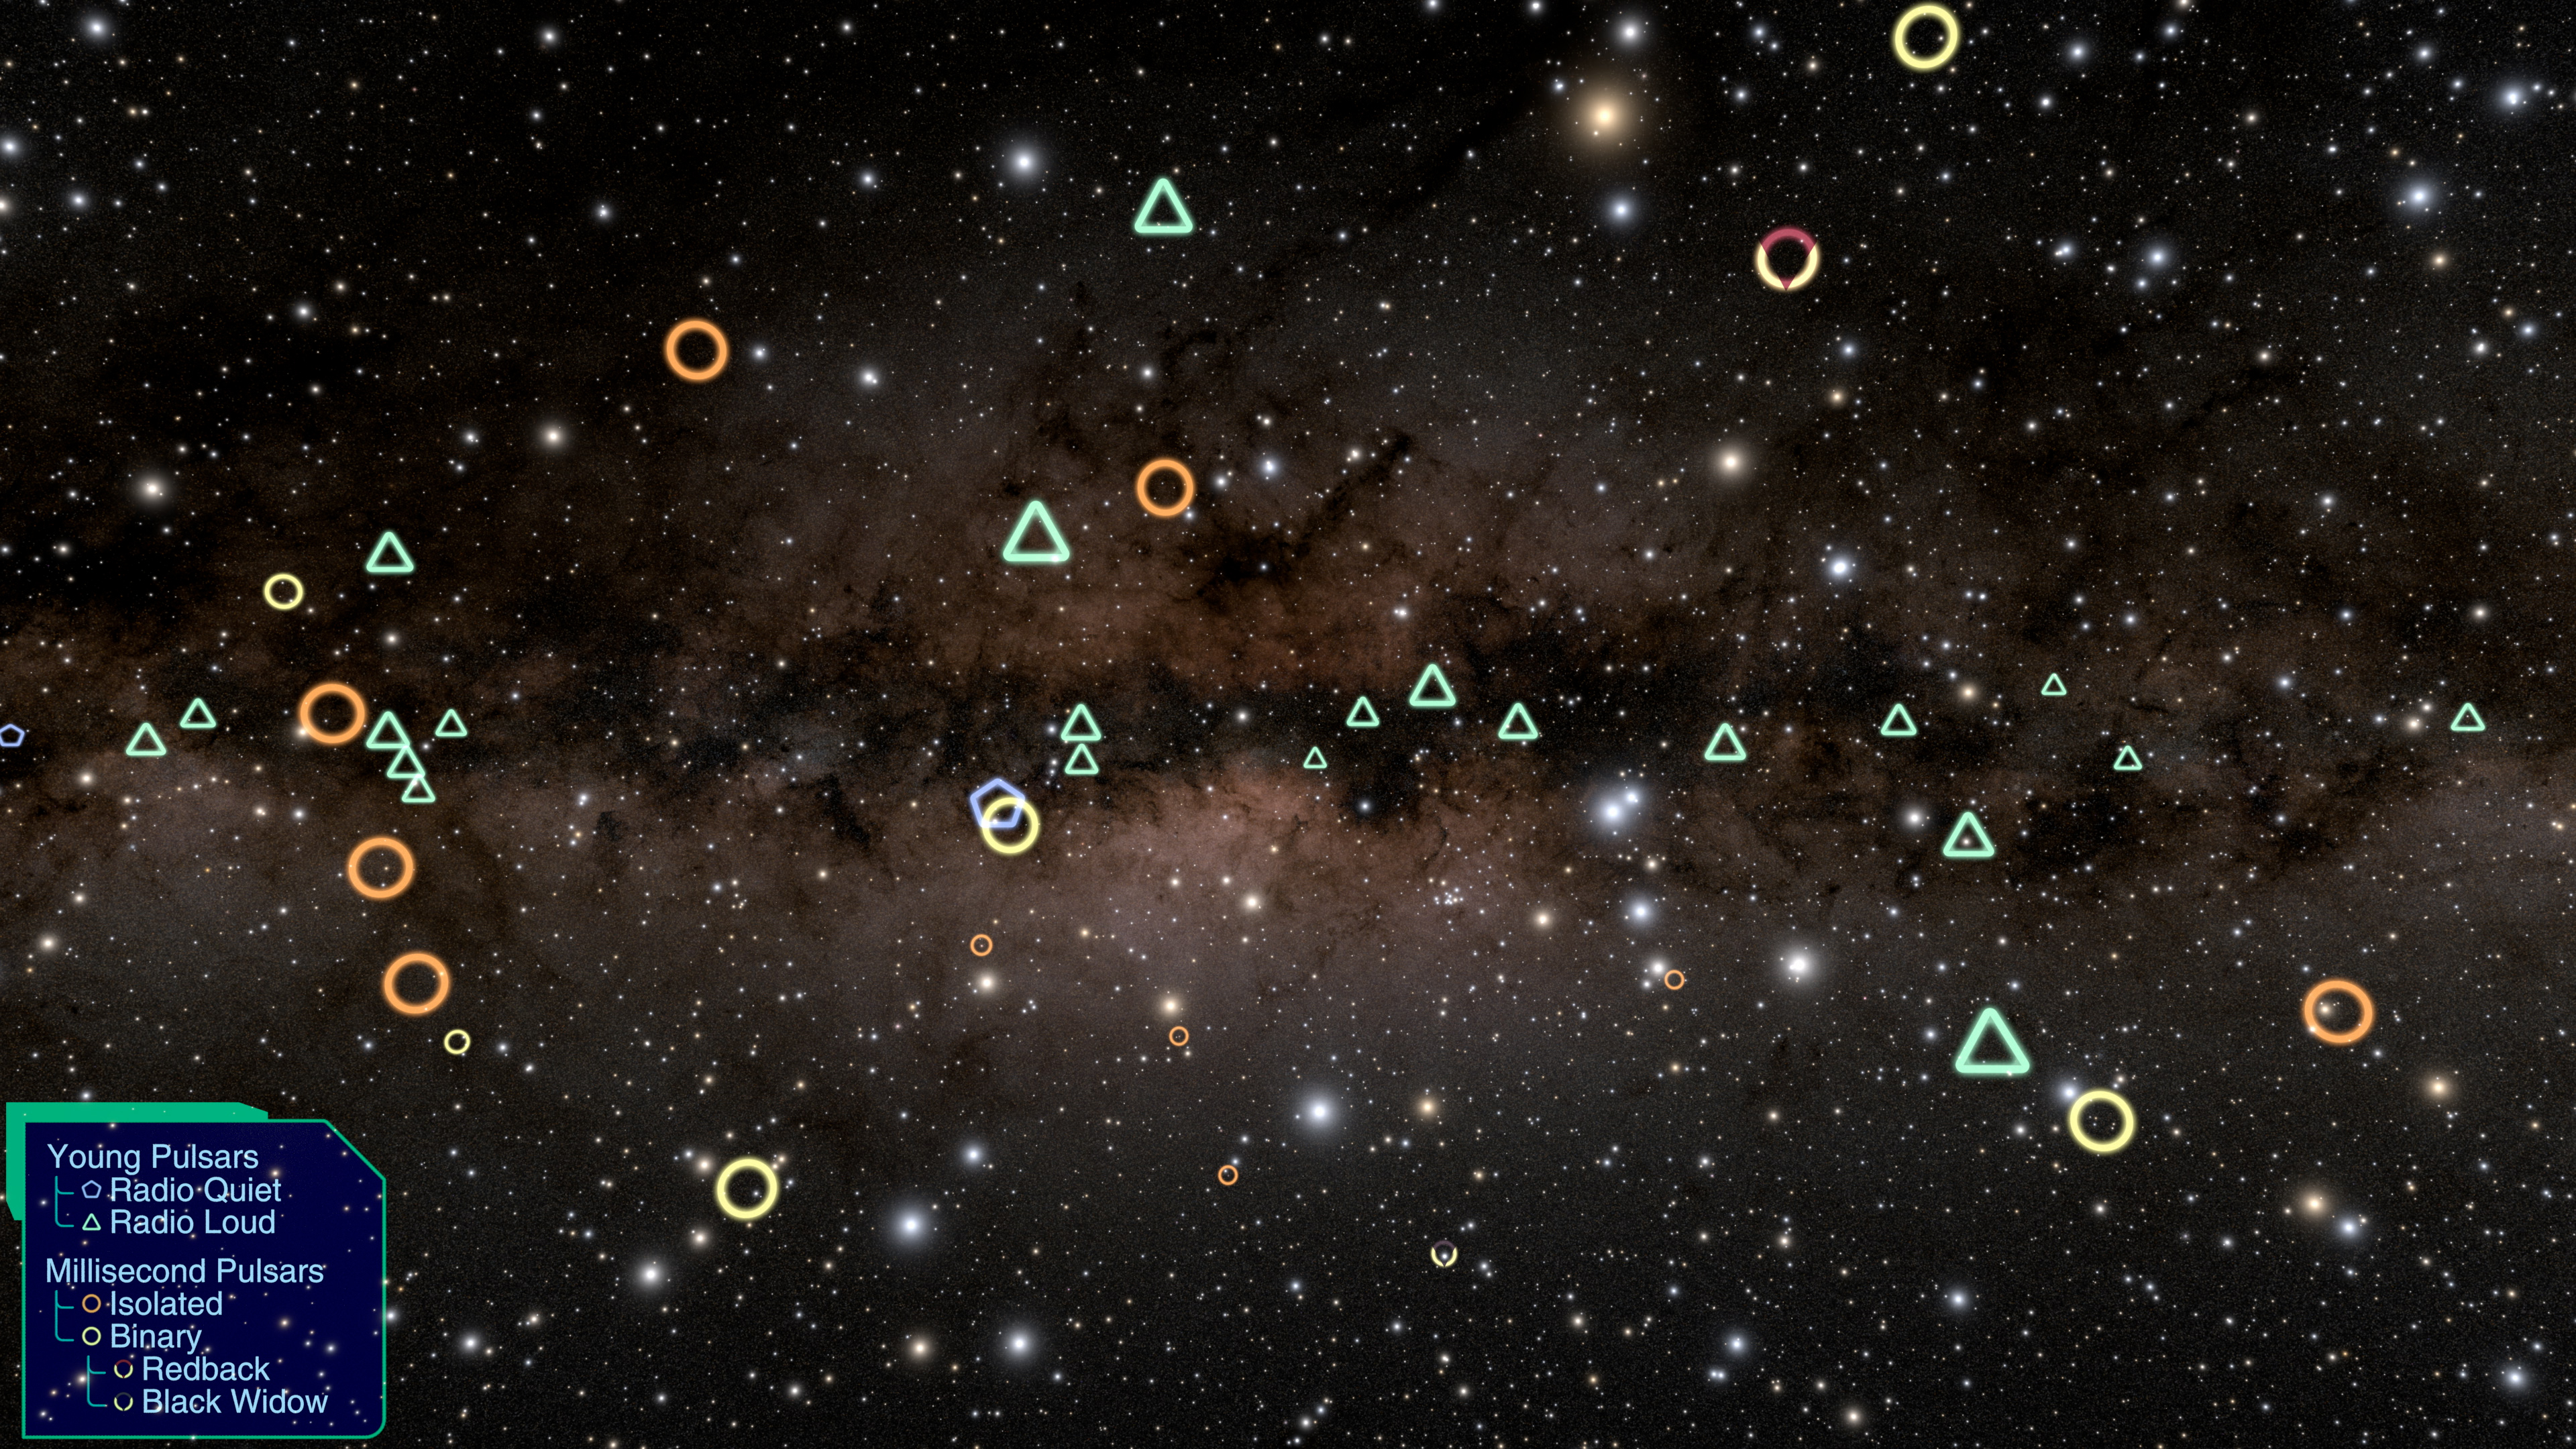 This visualization shows 294 gamma-ray pulsars, first plotted on an image of the entire starry sky as seen from Earth and then transitioning to a view from above our galaxy. The symbols show different types of pulsars. Young pulsars blink in real time except for the Crab, which pulses slower because its rate is only slightly lower than the video frame rate. Millisecond pulsars remain steady, pulsing too quickly to see. The Crab, Vela, and Geminga were among the 11 gamma-ray pulsars known before Fermi launched. Other notable objects are also highlighted. Distances are shown in light-years (abbreviated ly).Credit: NASA’s Goddard Space Flight CenterMusic: "Fascination" from Universal Production MusicWatch this video on the NASA.gov Video YouTube channel.Complete transcript available.